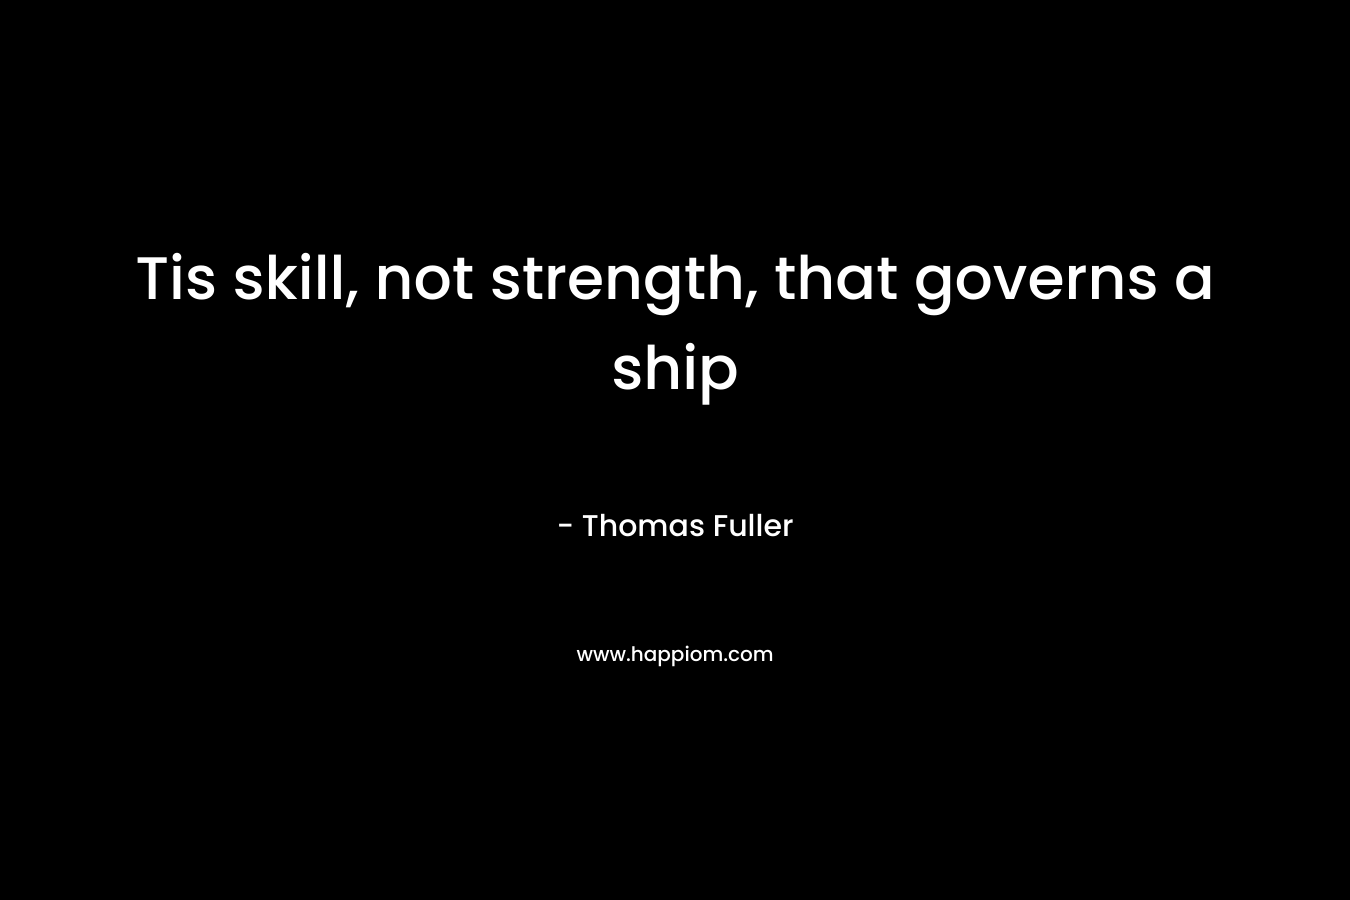 Tis skill, not strength, that governs a ship